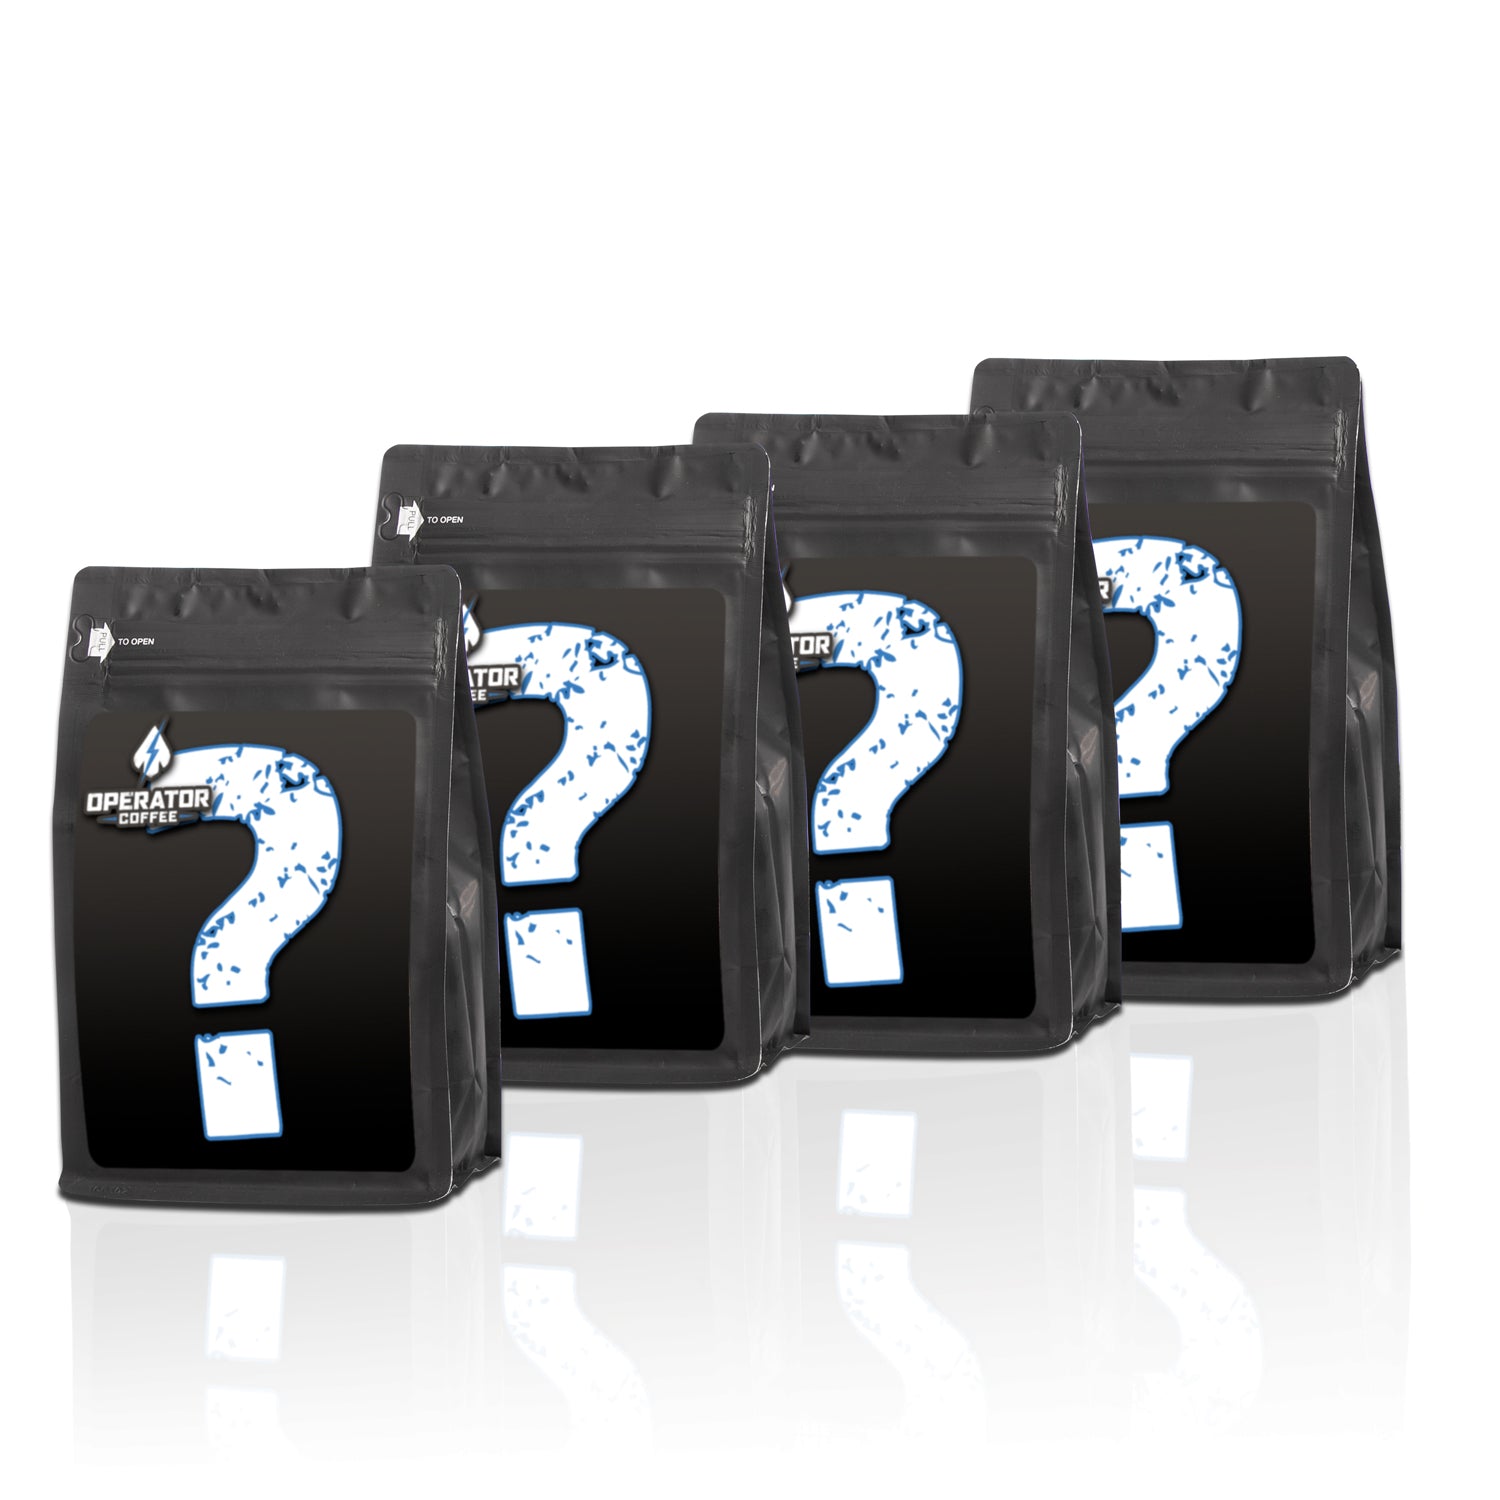 Four blank black 12 ounce coffee bags with question mark on the front of each bag. 